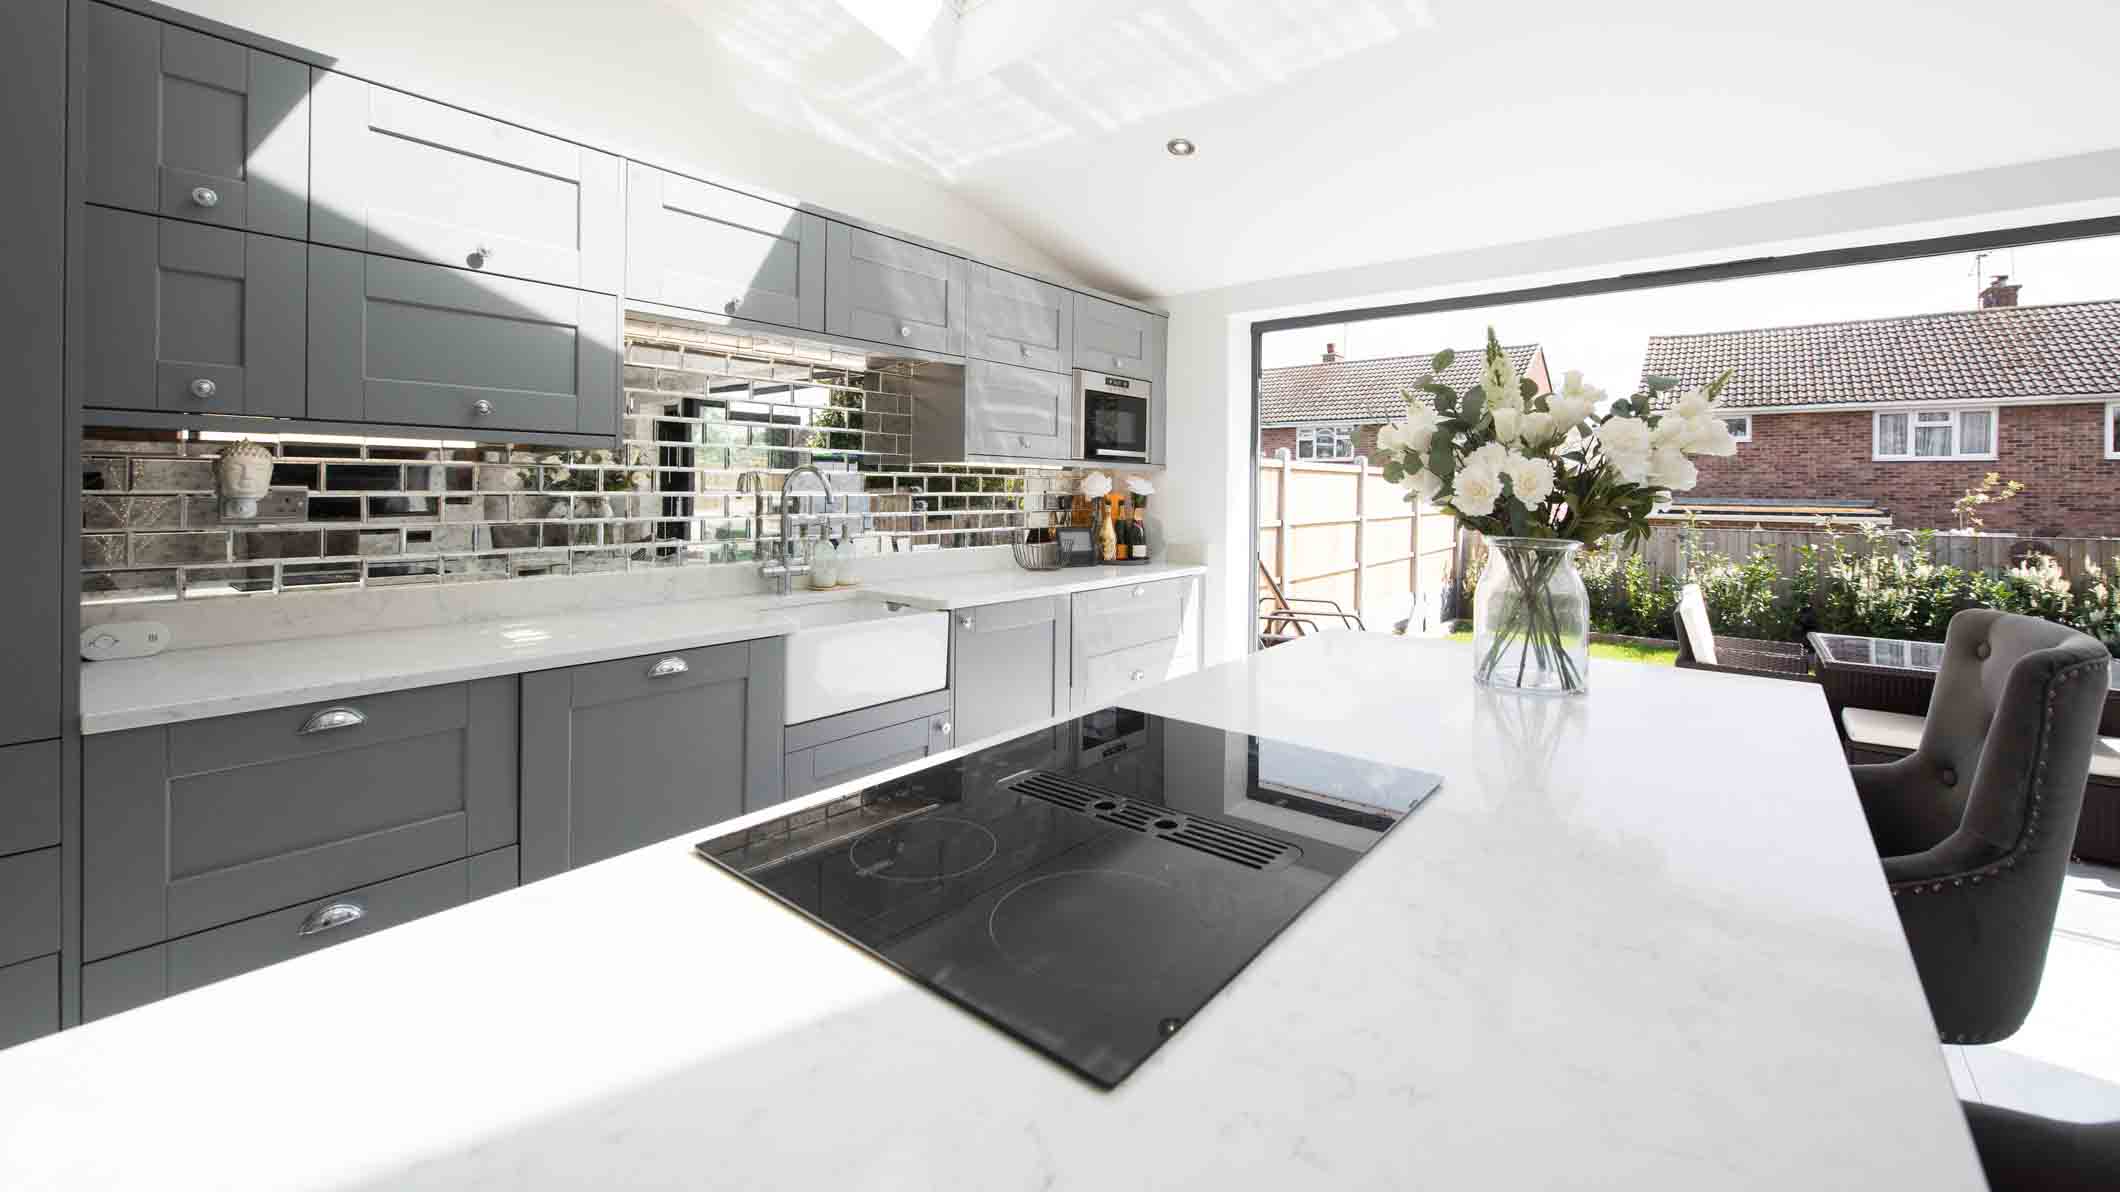 An image of a white kitchen with a black electric cooktop